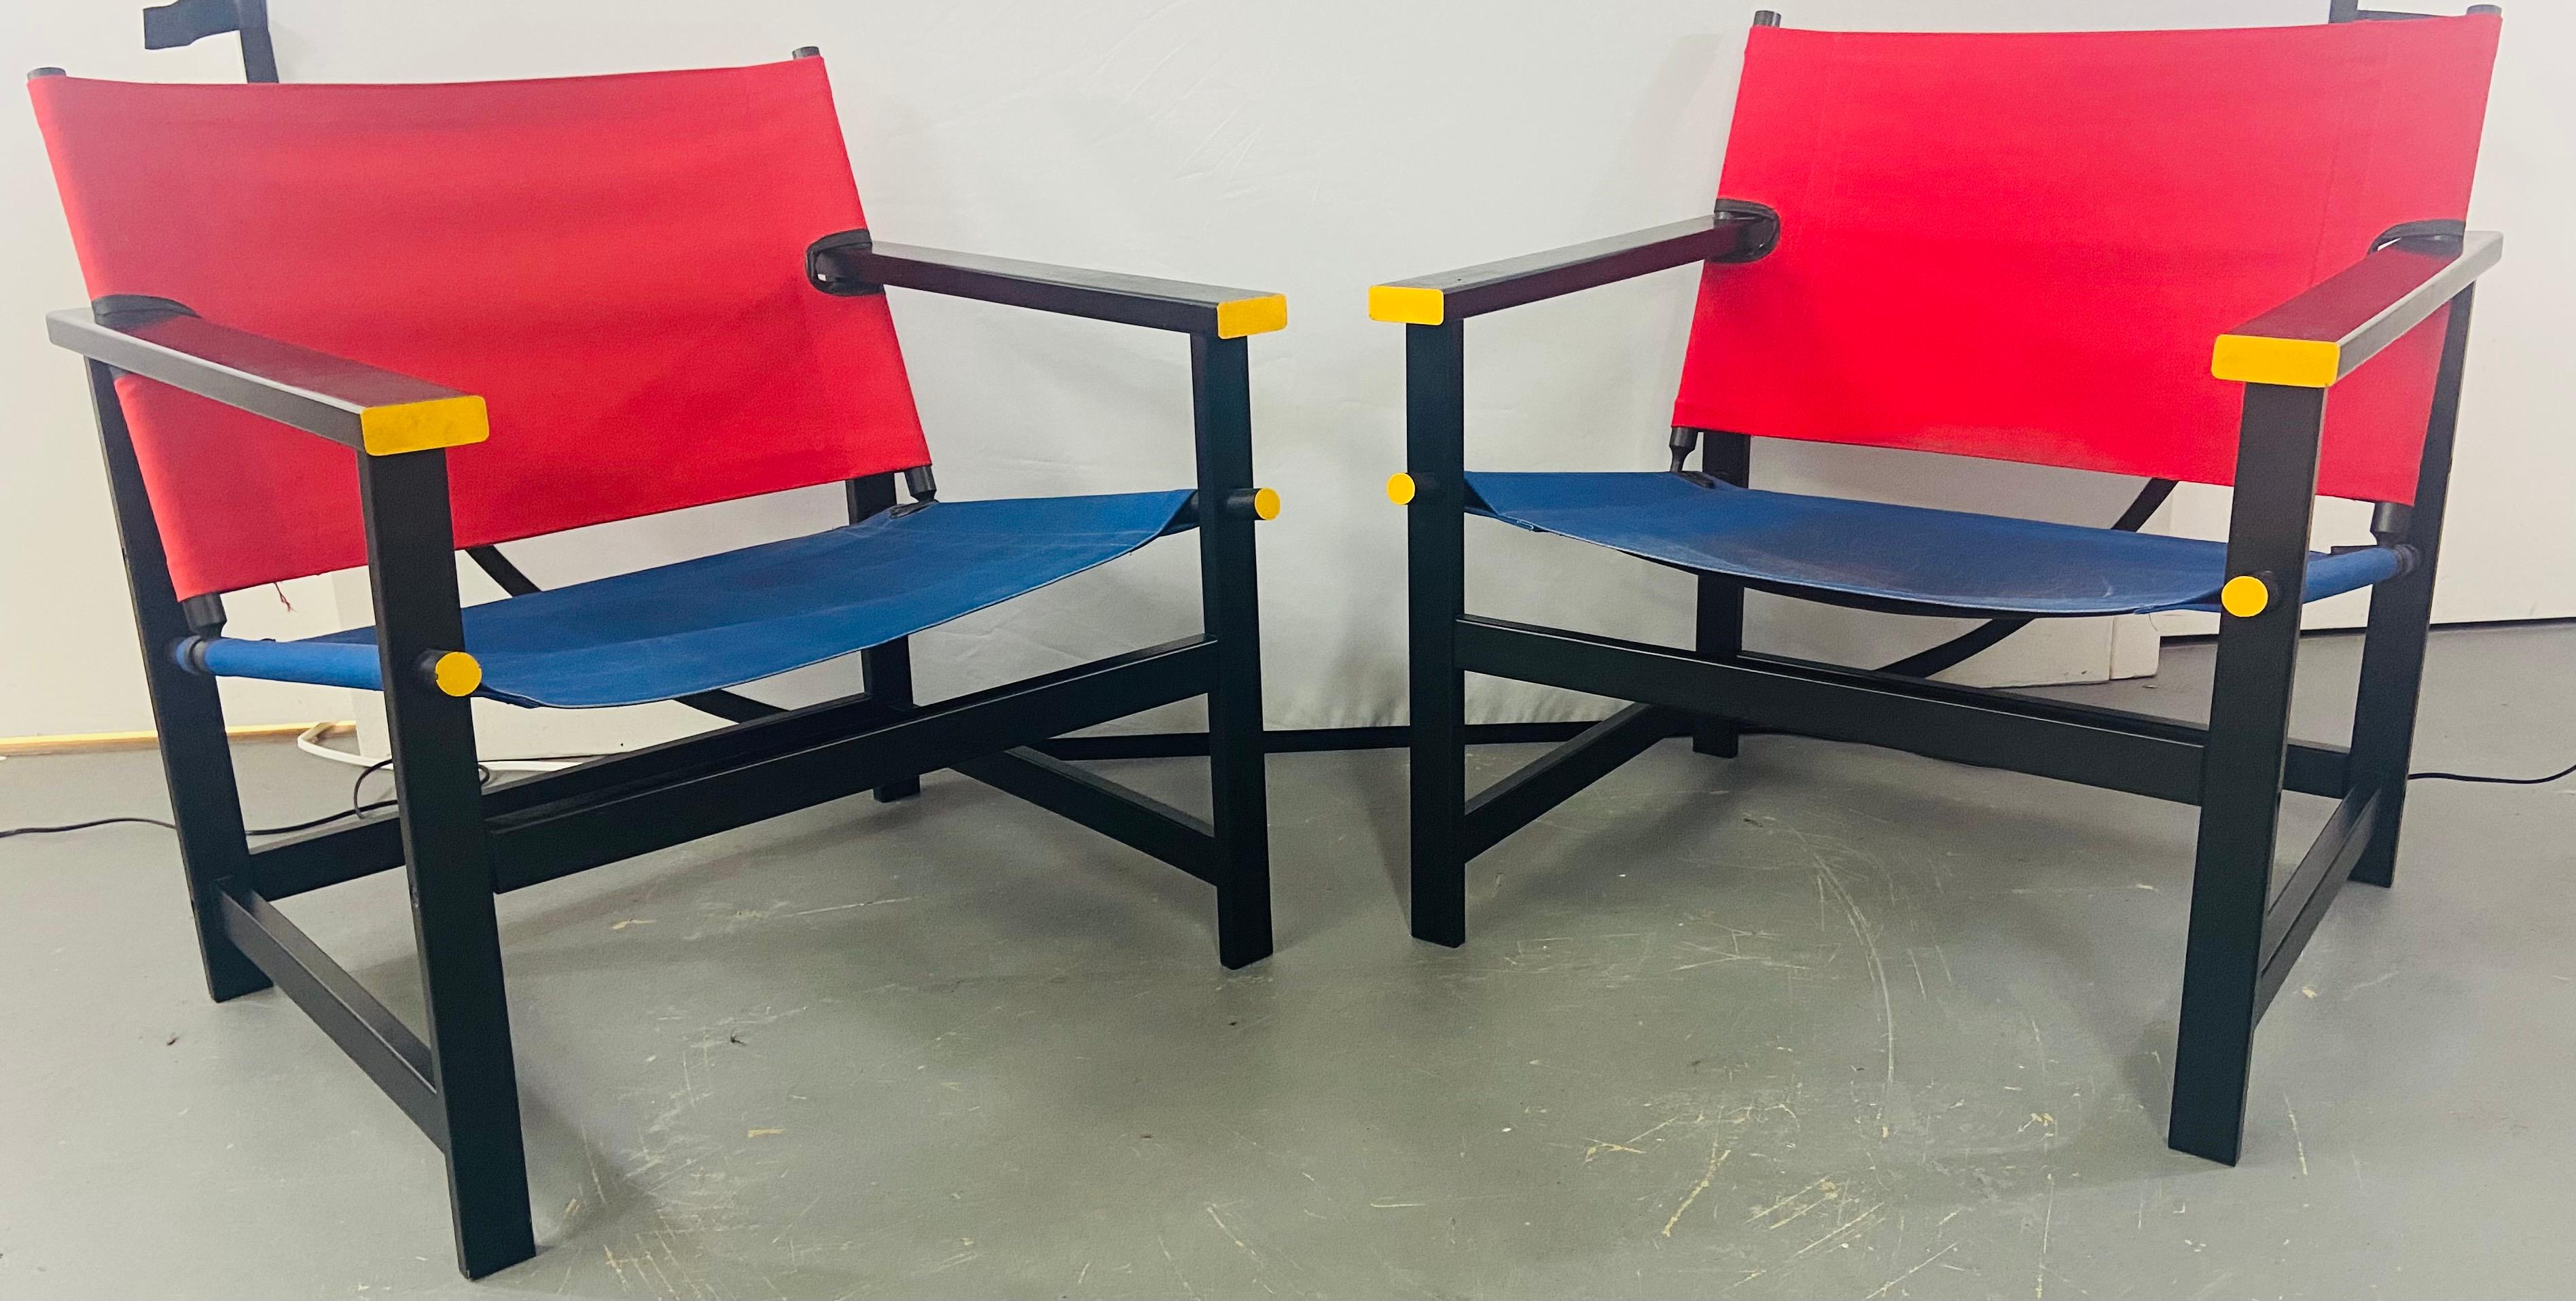 A stylish and comfortable pair of Mondrian red and blue sling chairs in the manner of Gerrit T Rietveld. The iconic design was created in 1918 in Netherlands and is associated with the dutch De Stijl art and architecture movement founded by Piet